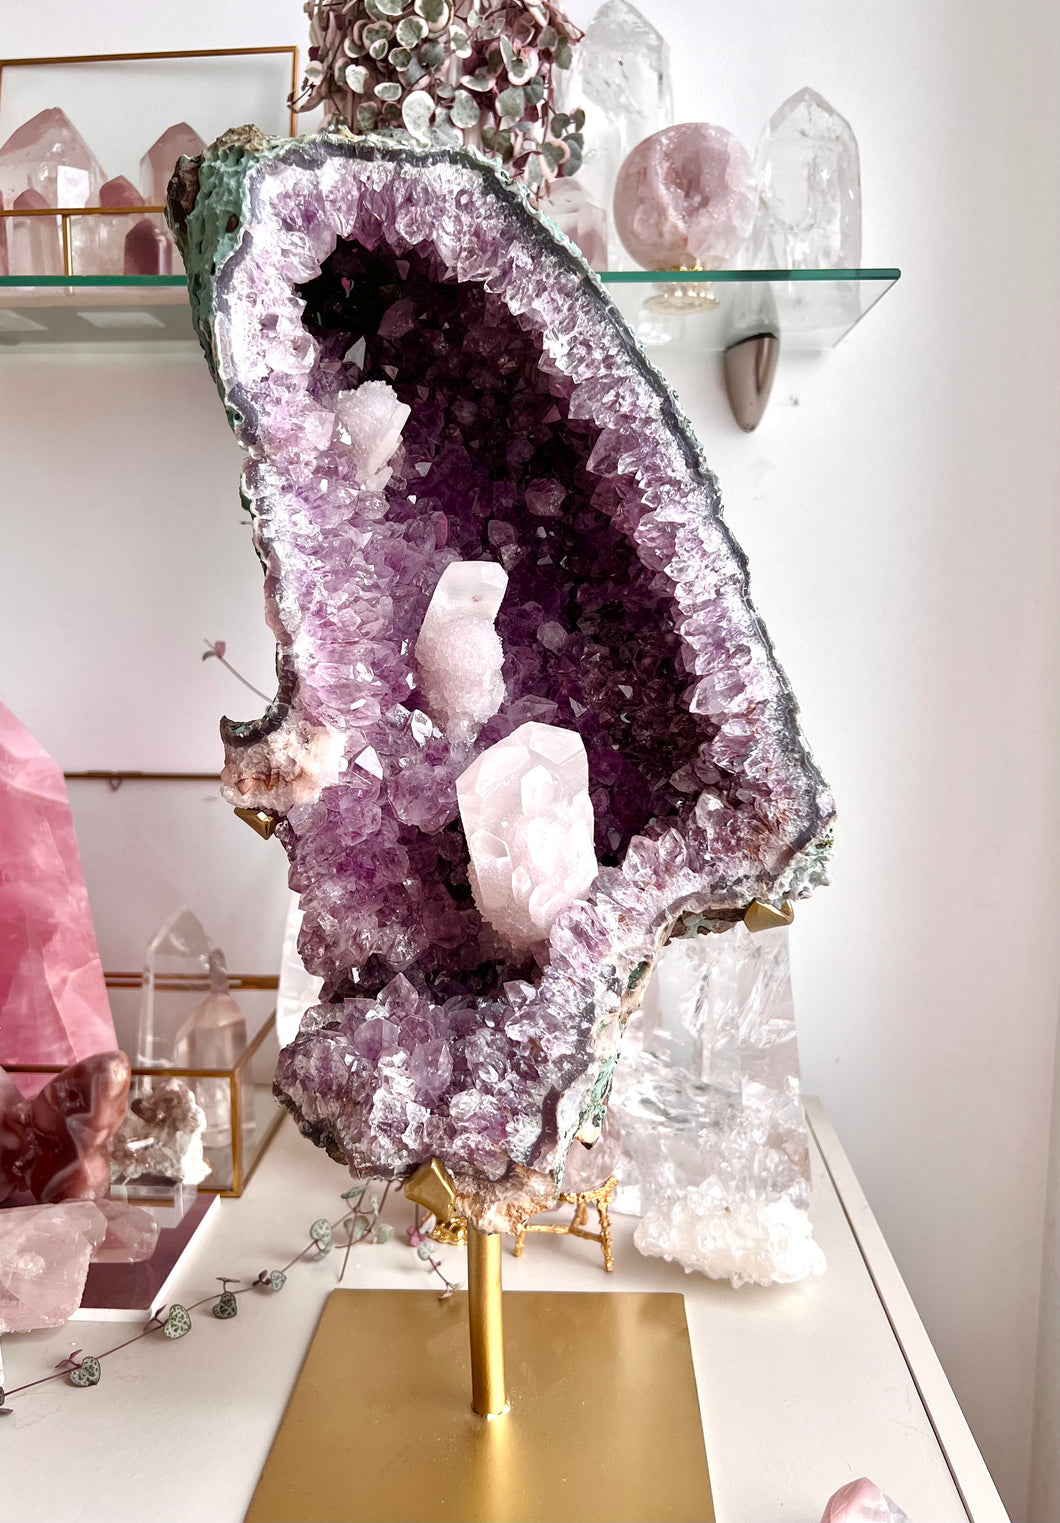 Statement Amethyst cave on stand with sugar covered calcite